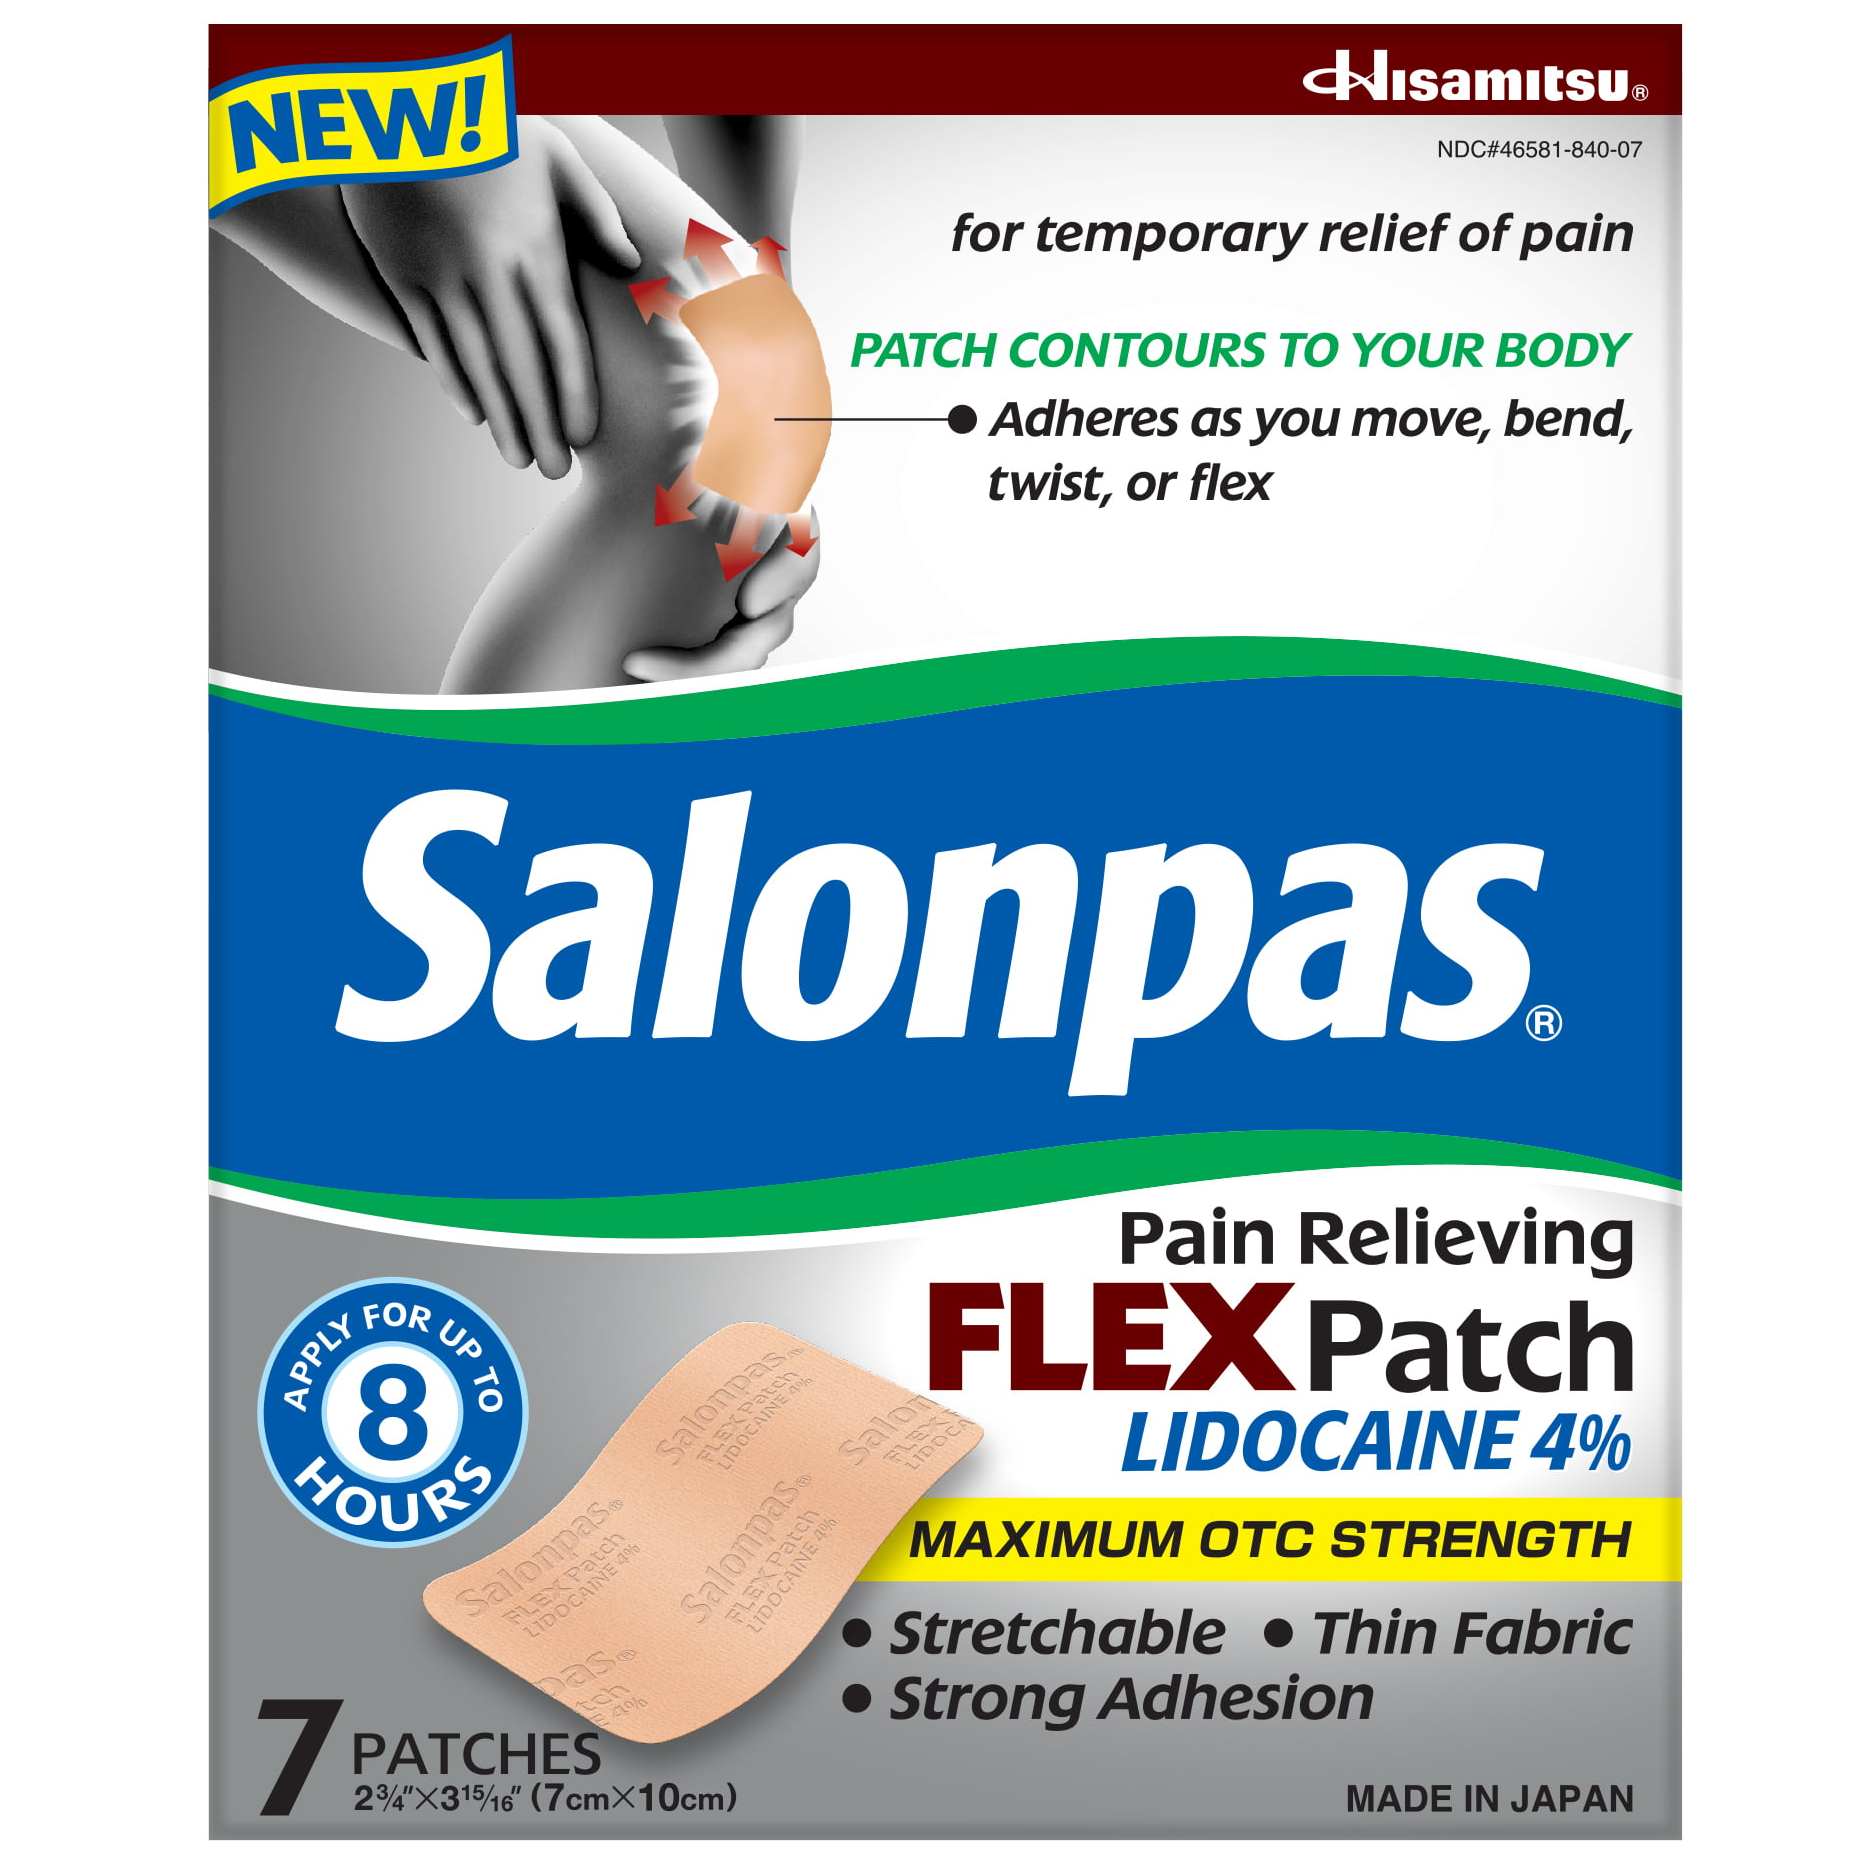 Salonpas Lidocaine 4% Pain Relief FLEX Patch, Unscented, Stays in Place, 7 Patches - image 1 of 9